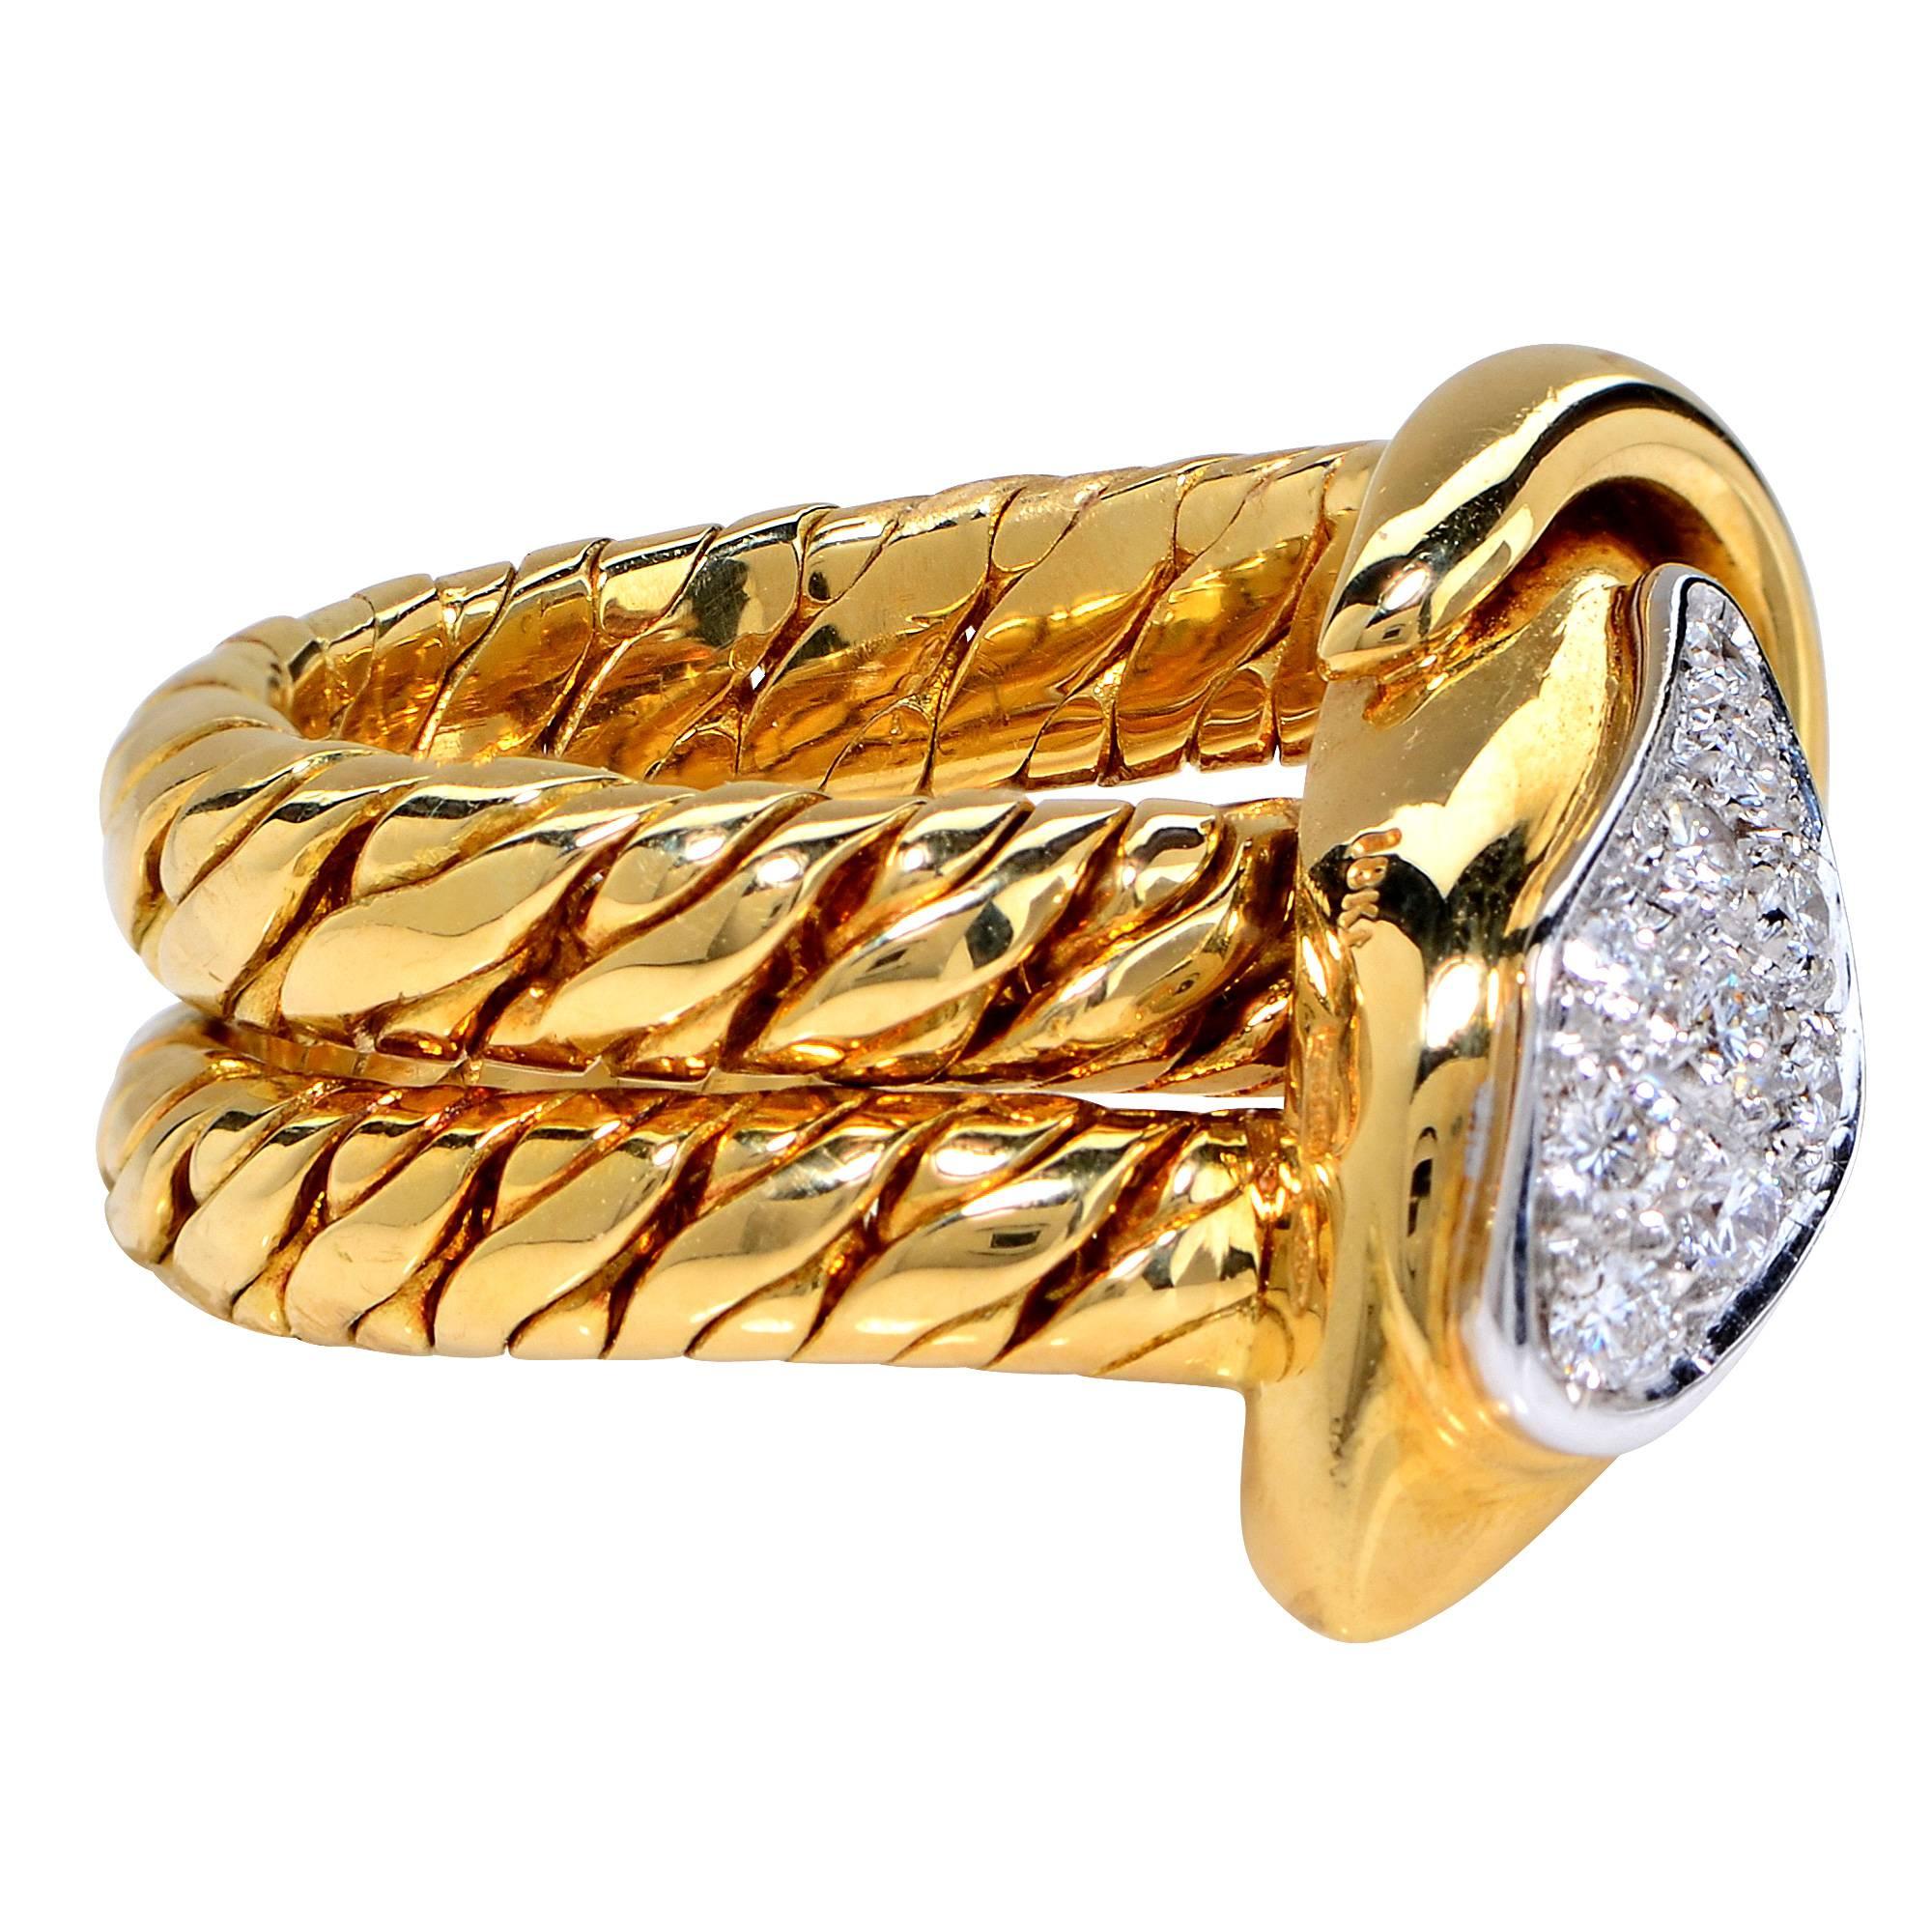 18 Karat Yellow Gold Pomellato Diamond Snake Ring Featuring 10 Round Brilliant Cut Diamonds with an Estimated Total Weight of .35 Carats.

Ring size: 5.5
Weight: 20.37 grams

This Ring is Accompanied by a Retail Appraisal Performed by an